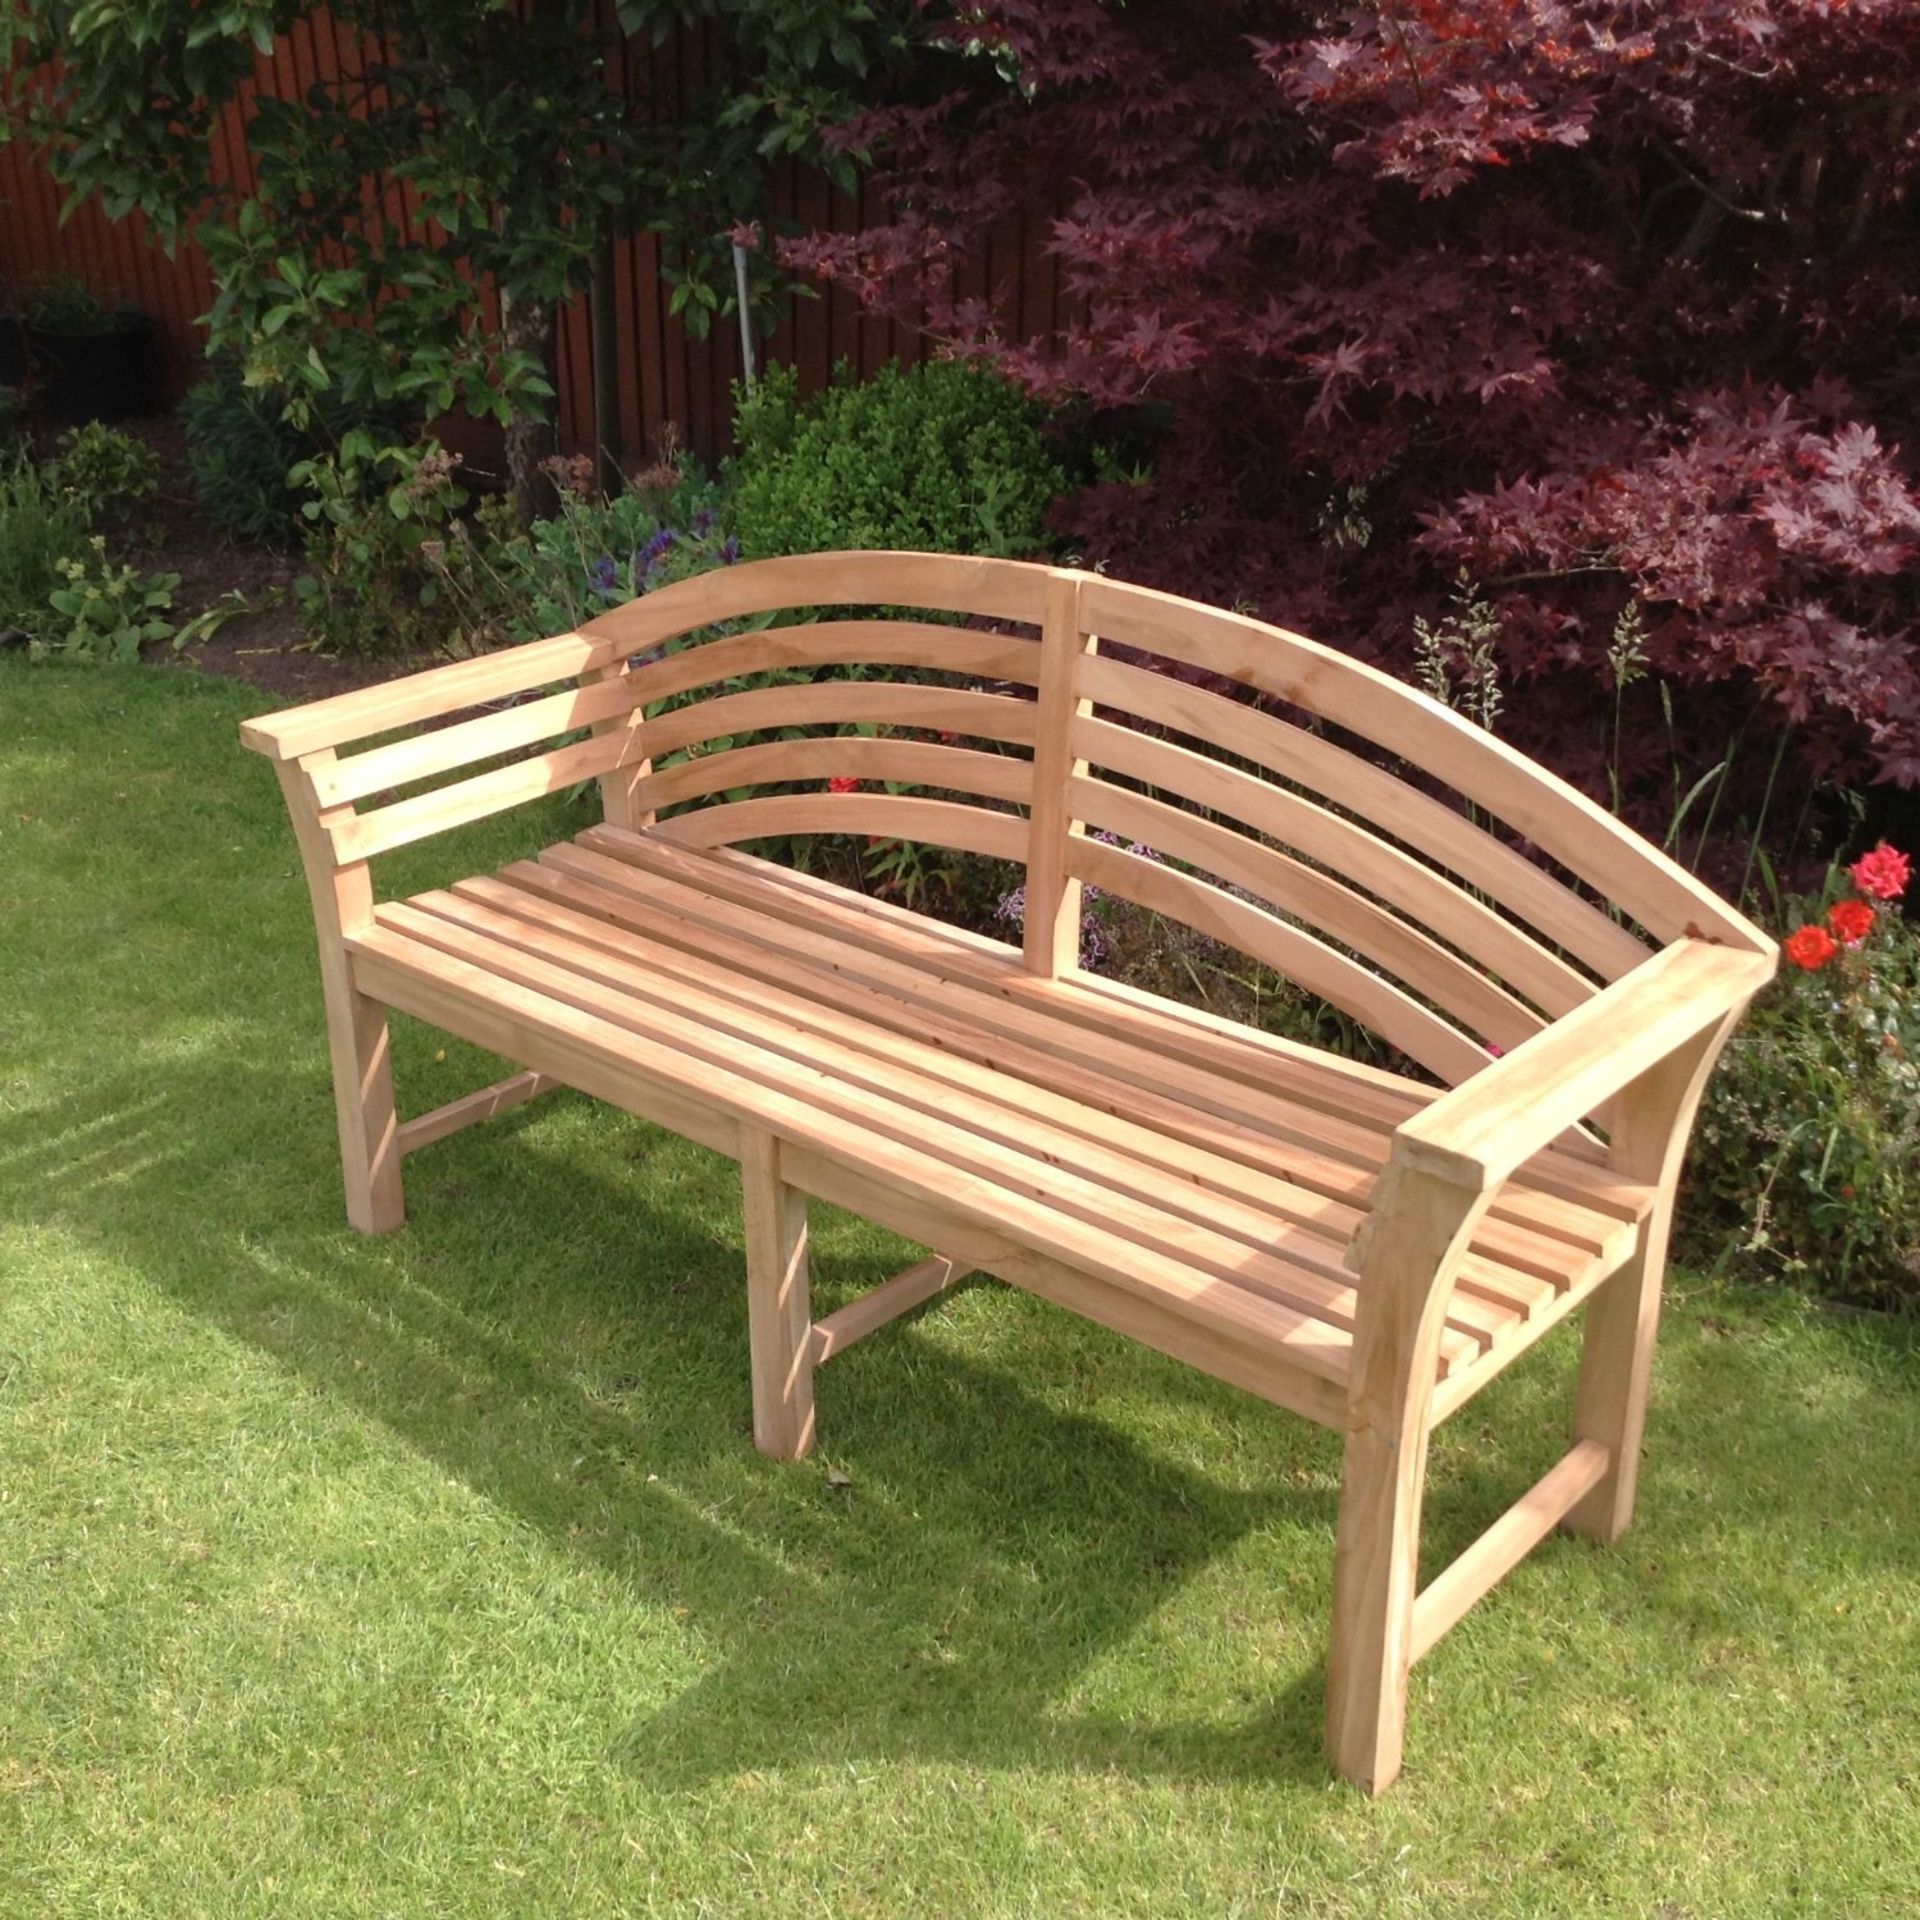 V Brand New Teak Princess Bench Seats Three People (ISP £275 Sustainable Furniture) NOTE: Item Is